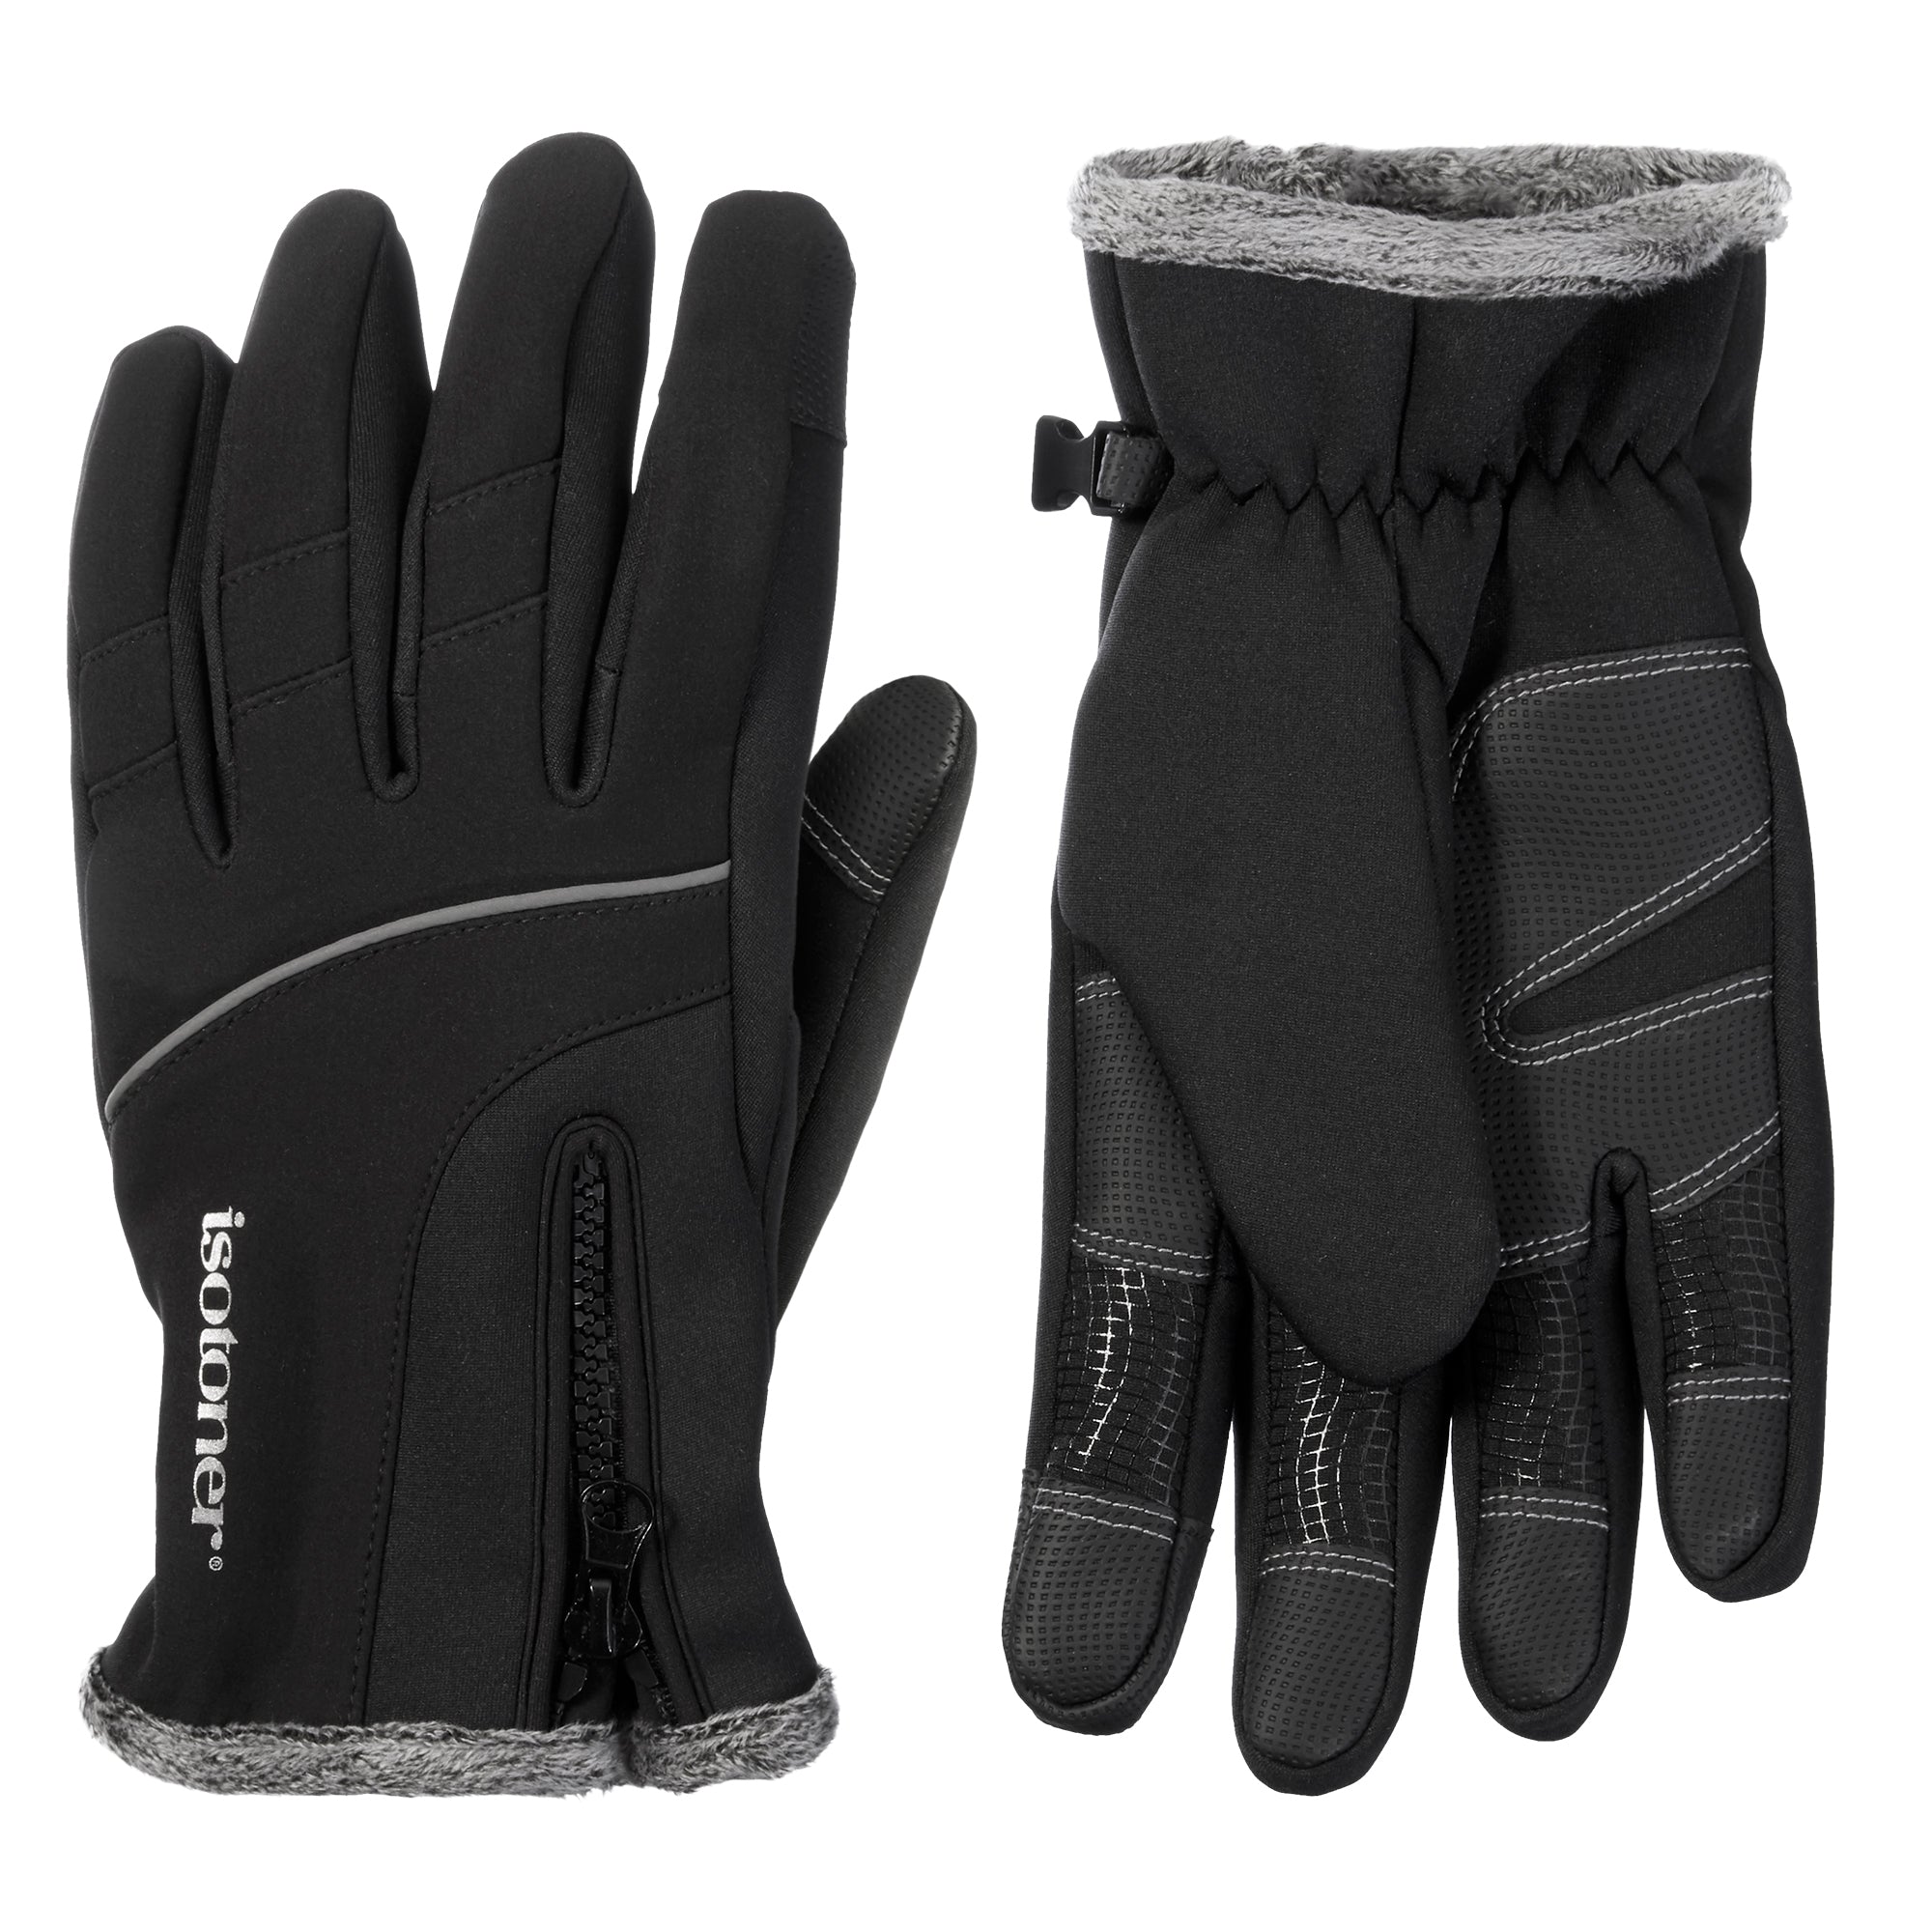 Isotoner Men's Neoprene Sport Gloves with Zipper with Smartouch Black Large